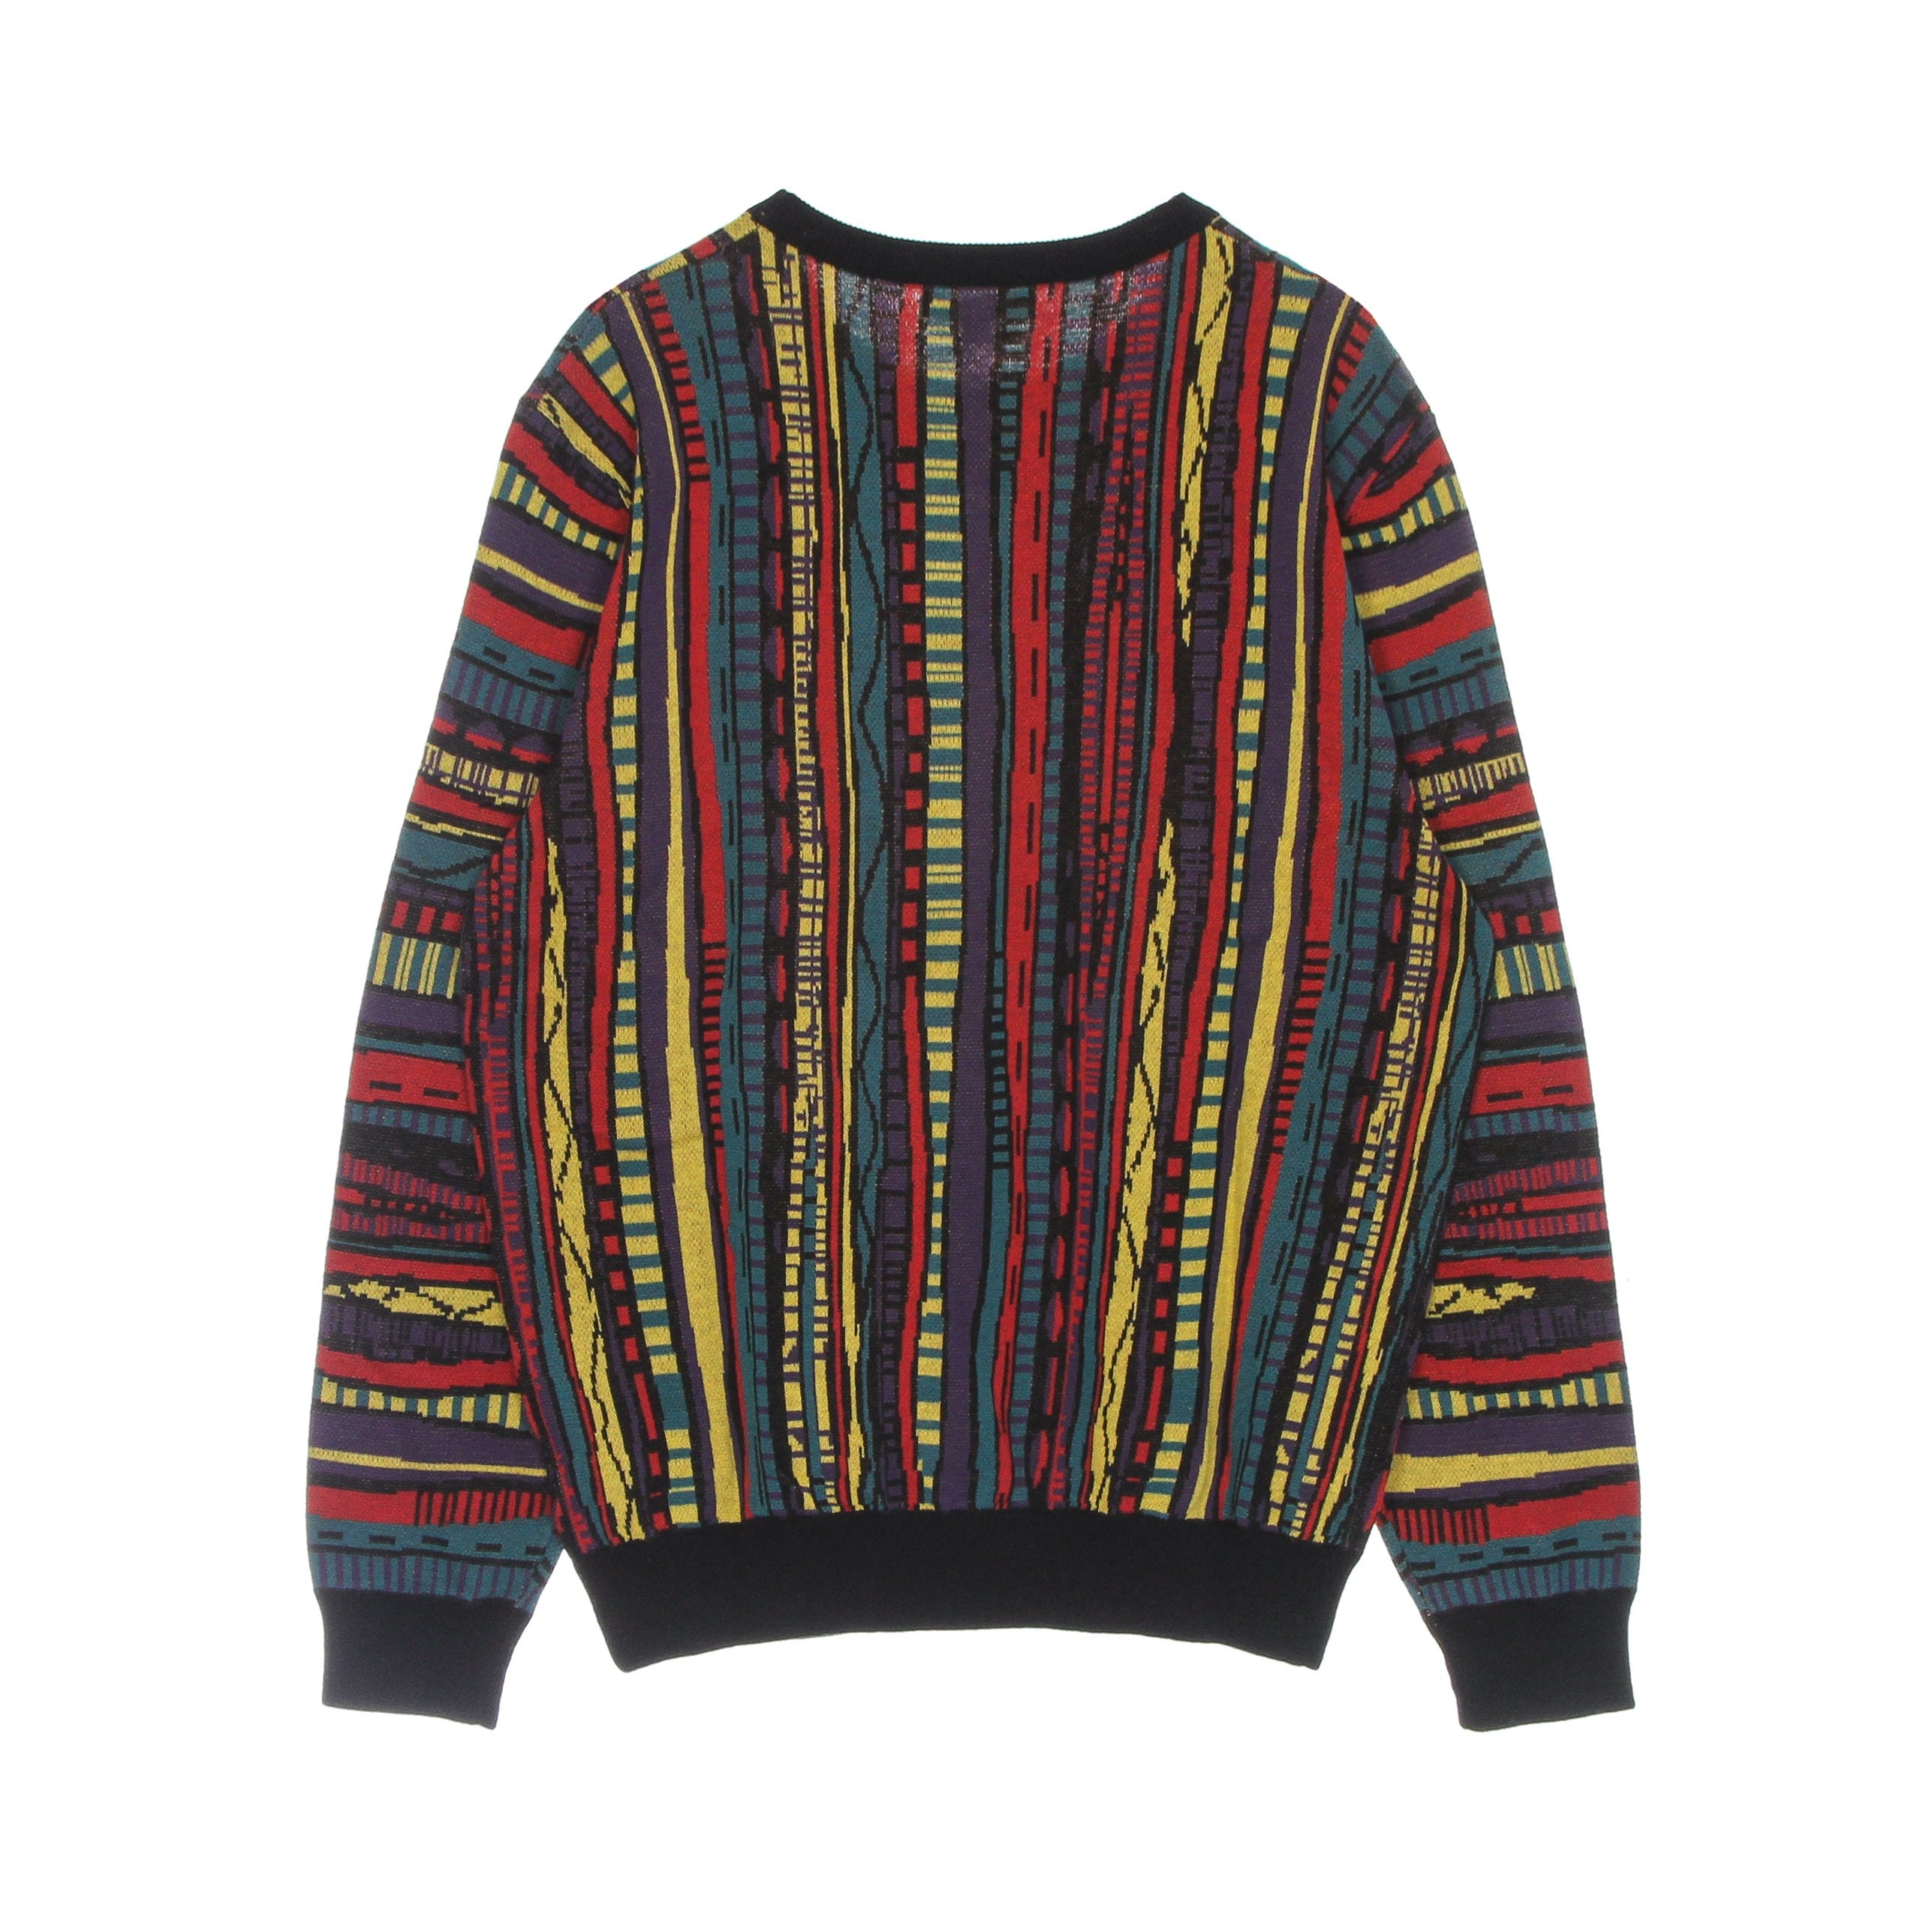 Theodore Summer Knit Colored Men's Sweater